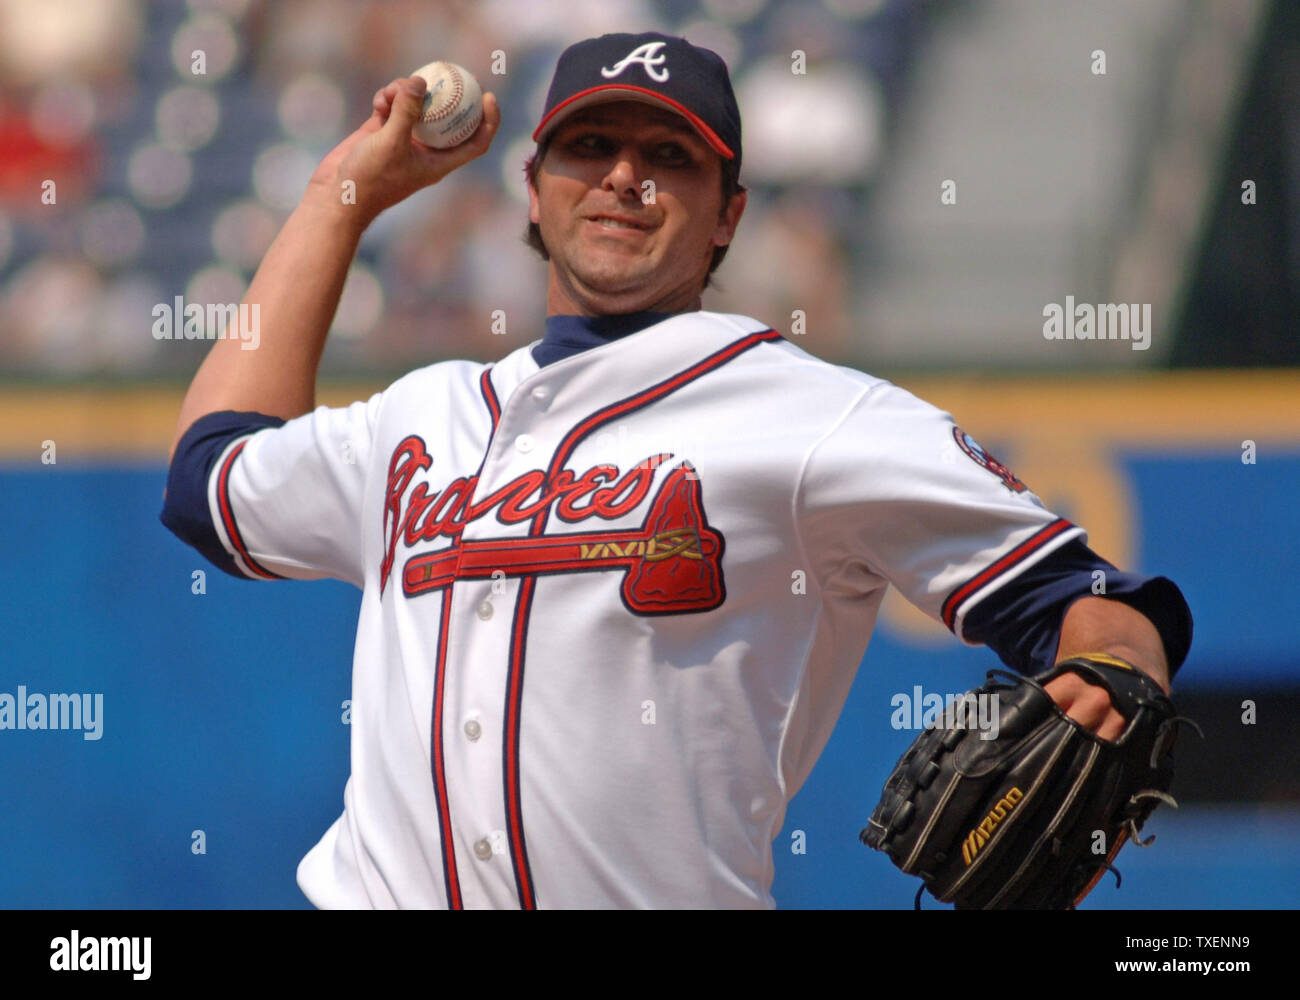 Atlanta Braves relief pitcher Ken Ray throws against the Boston Red Sox in the ninth inning June 17, 2006, in Atlanta's Turner Field.  The Red Sox defeated the Braves 5-3 (UPI Photo/John Dickerson) Stock Photo